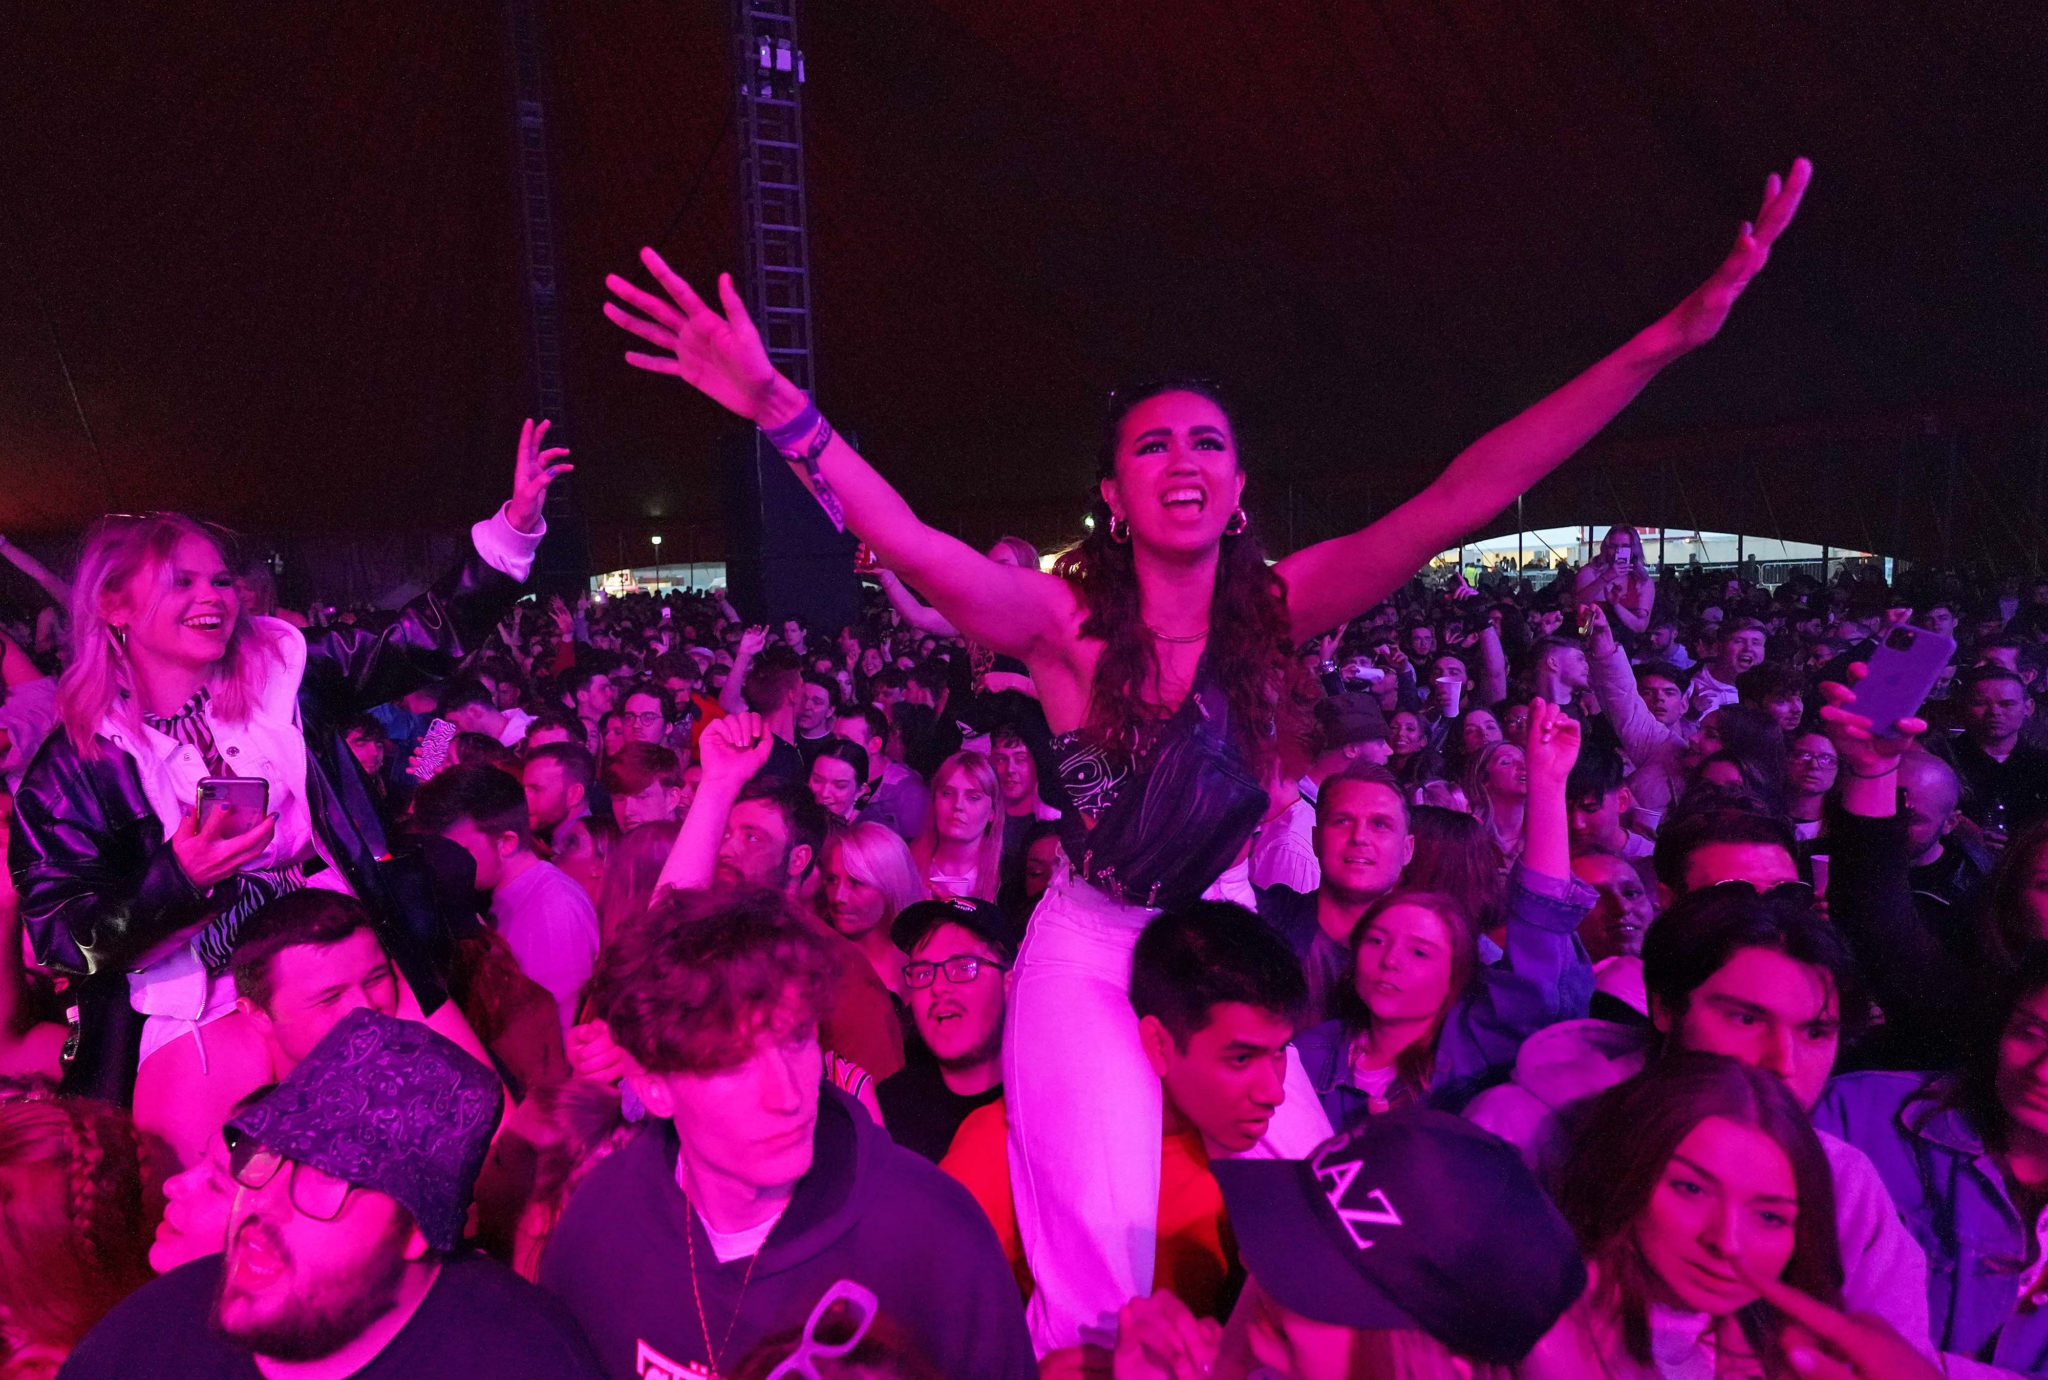 Crowds at a music festival in Sefton Park in Liverpool as part of the UK national Events Research Programme (ERP)